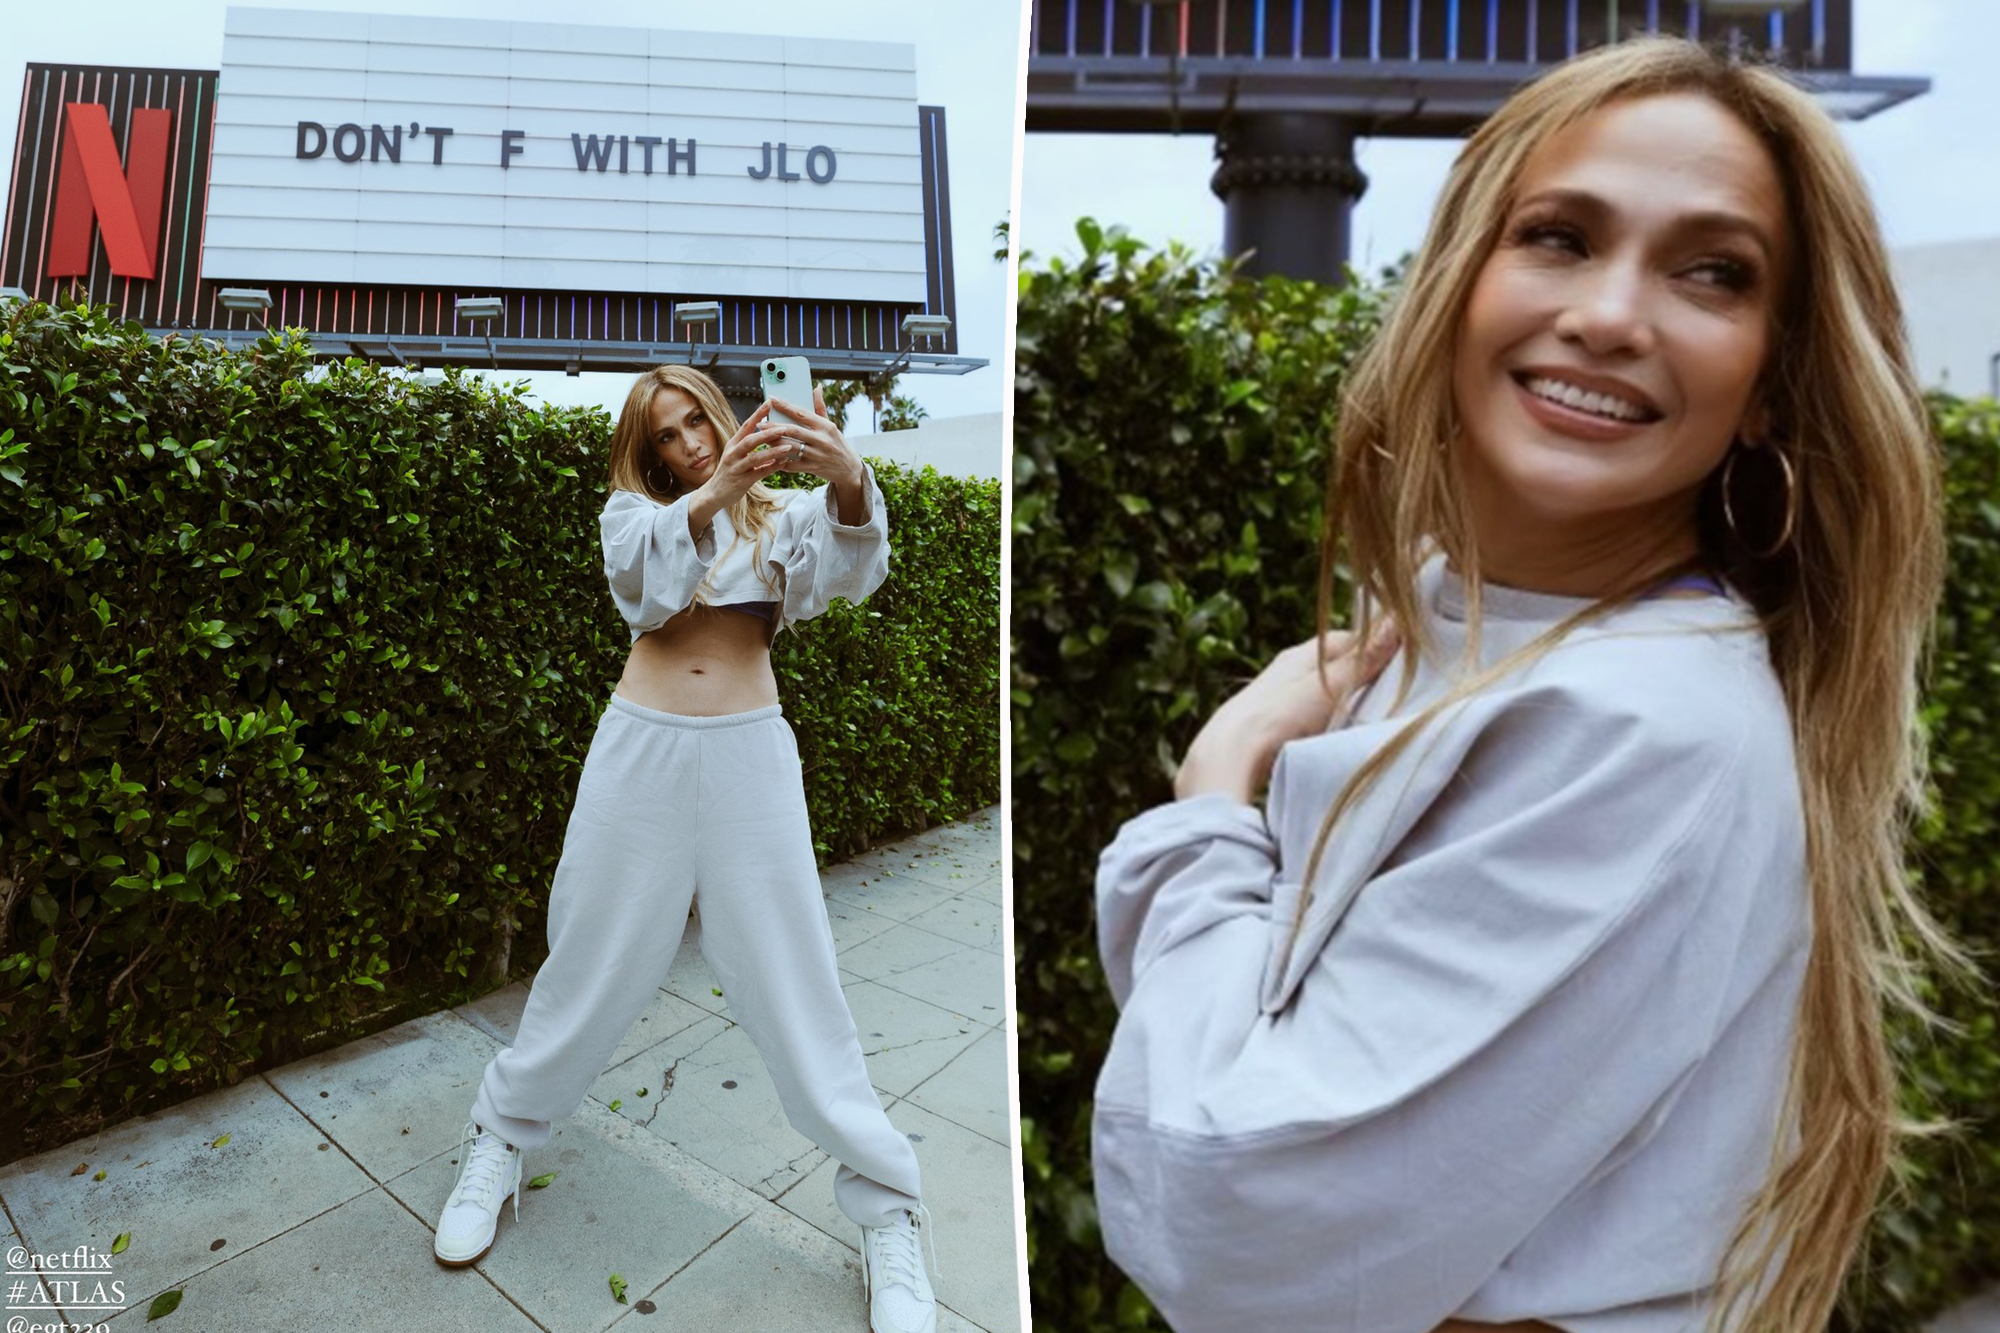 Jennifer Lopez Embraces Her Power in Front of 'Don't F with JLo' Billboard